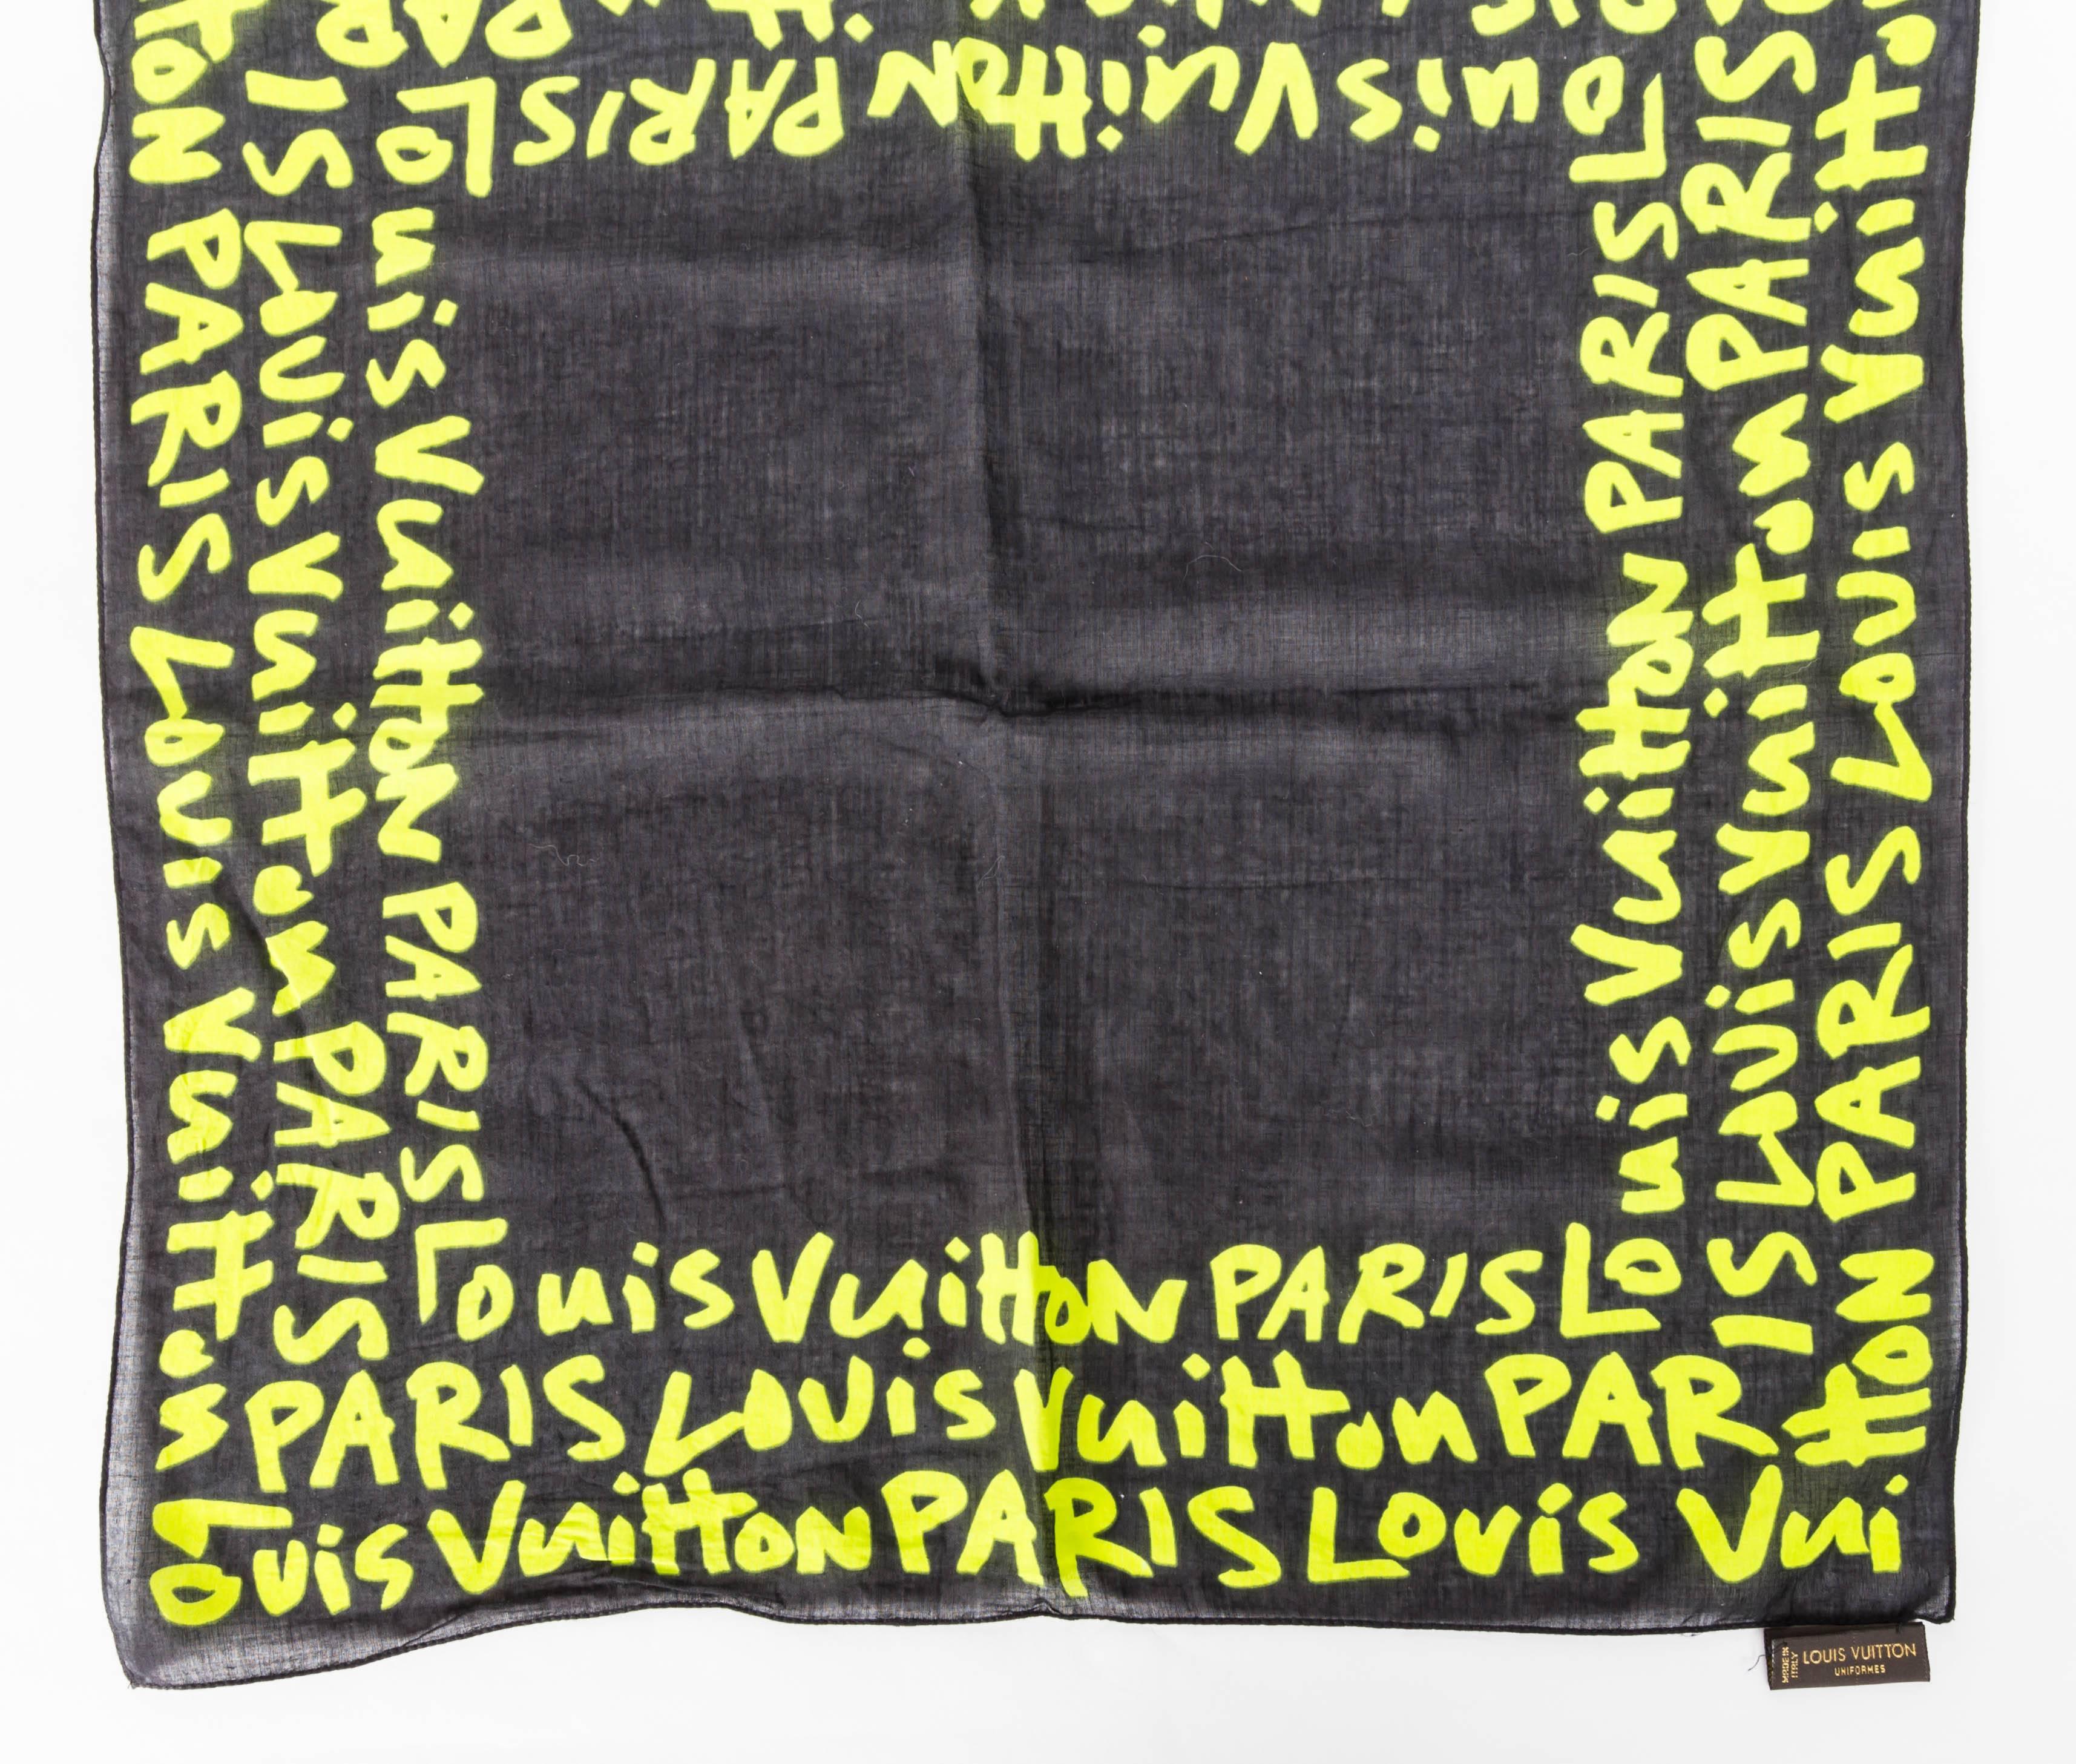 Iconic Stephen Sprouse Louis Vuitton Graffiti Scarf
18.25 x 18.25 inches
Condition is Very Good to Excellent